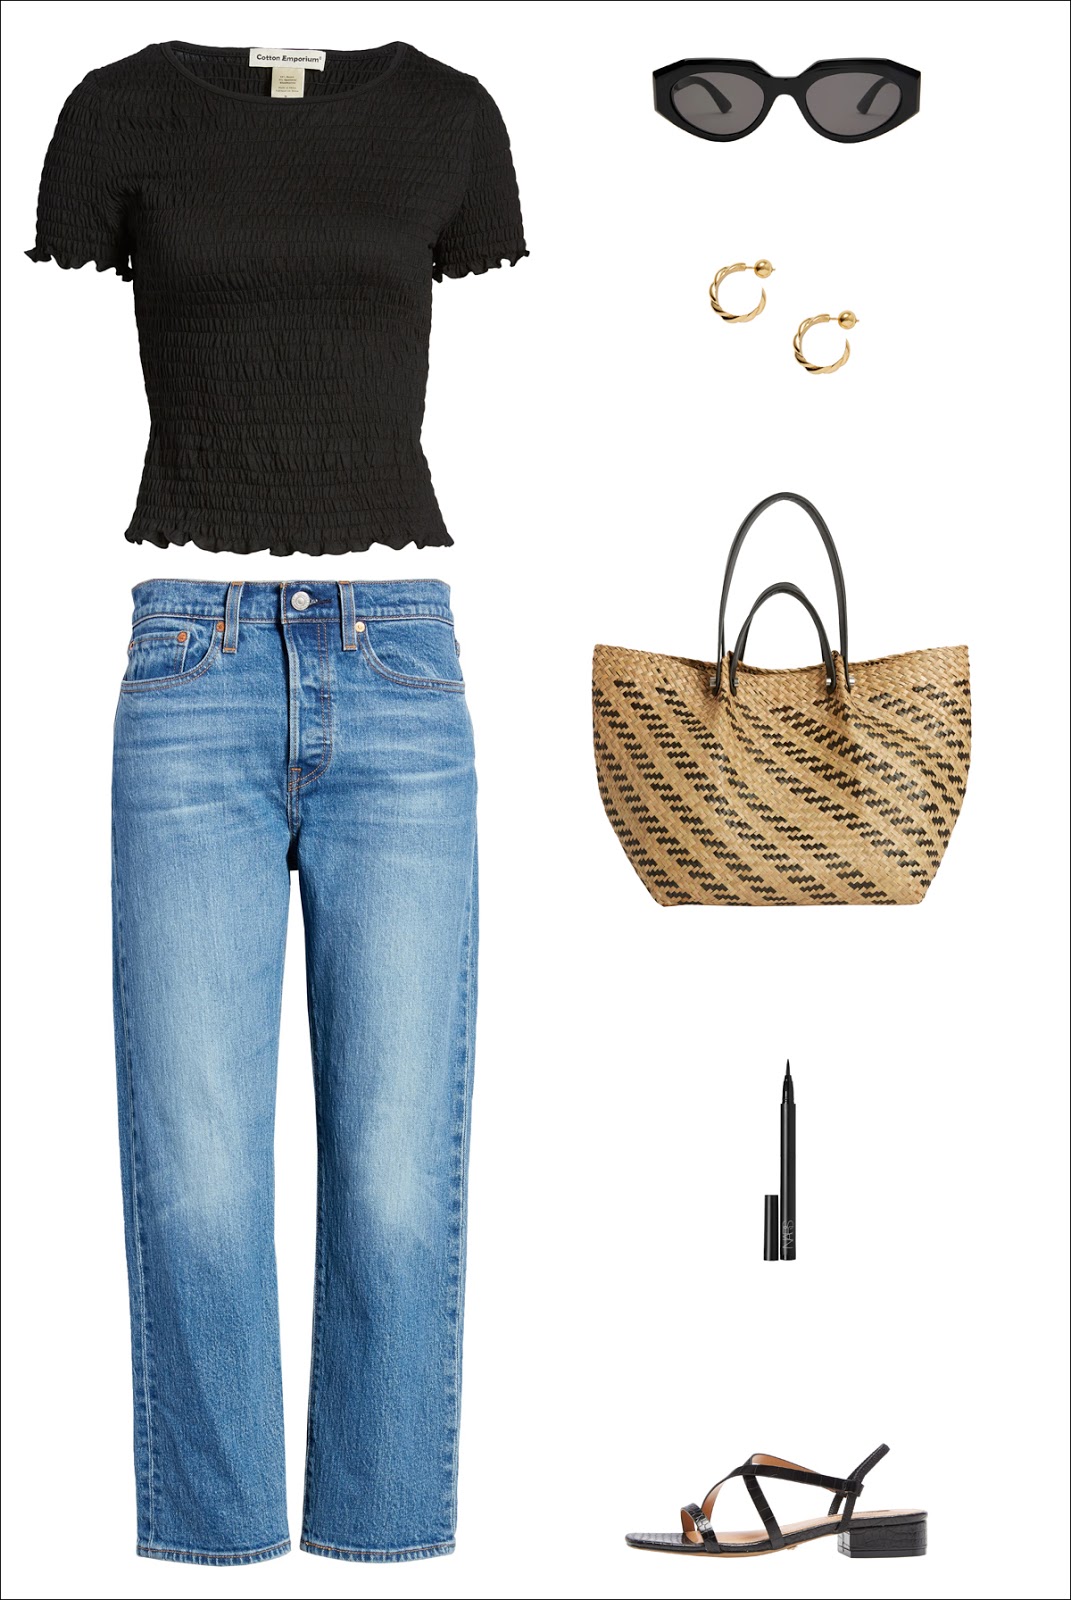 Casual-Chic Outfit Idea — black smocked t-shirt, cat-eye sunglasses, gold hoop earrings, a sleek straw tote bag, straight-leg jeans, and strappy sandals.